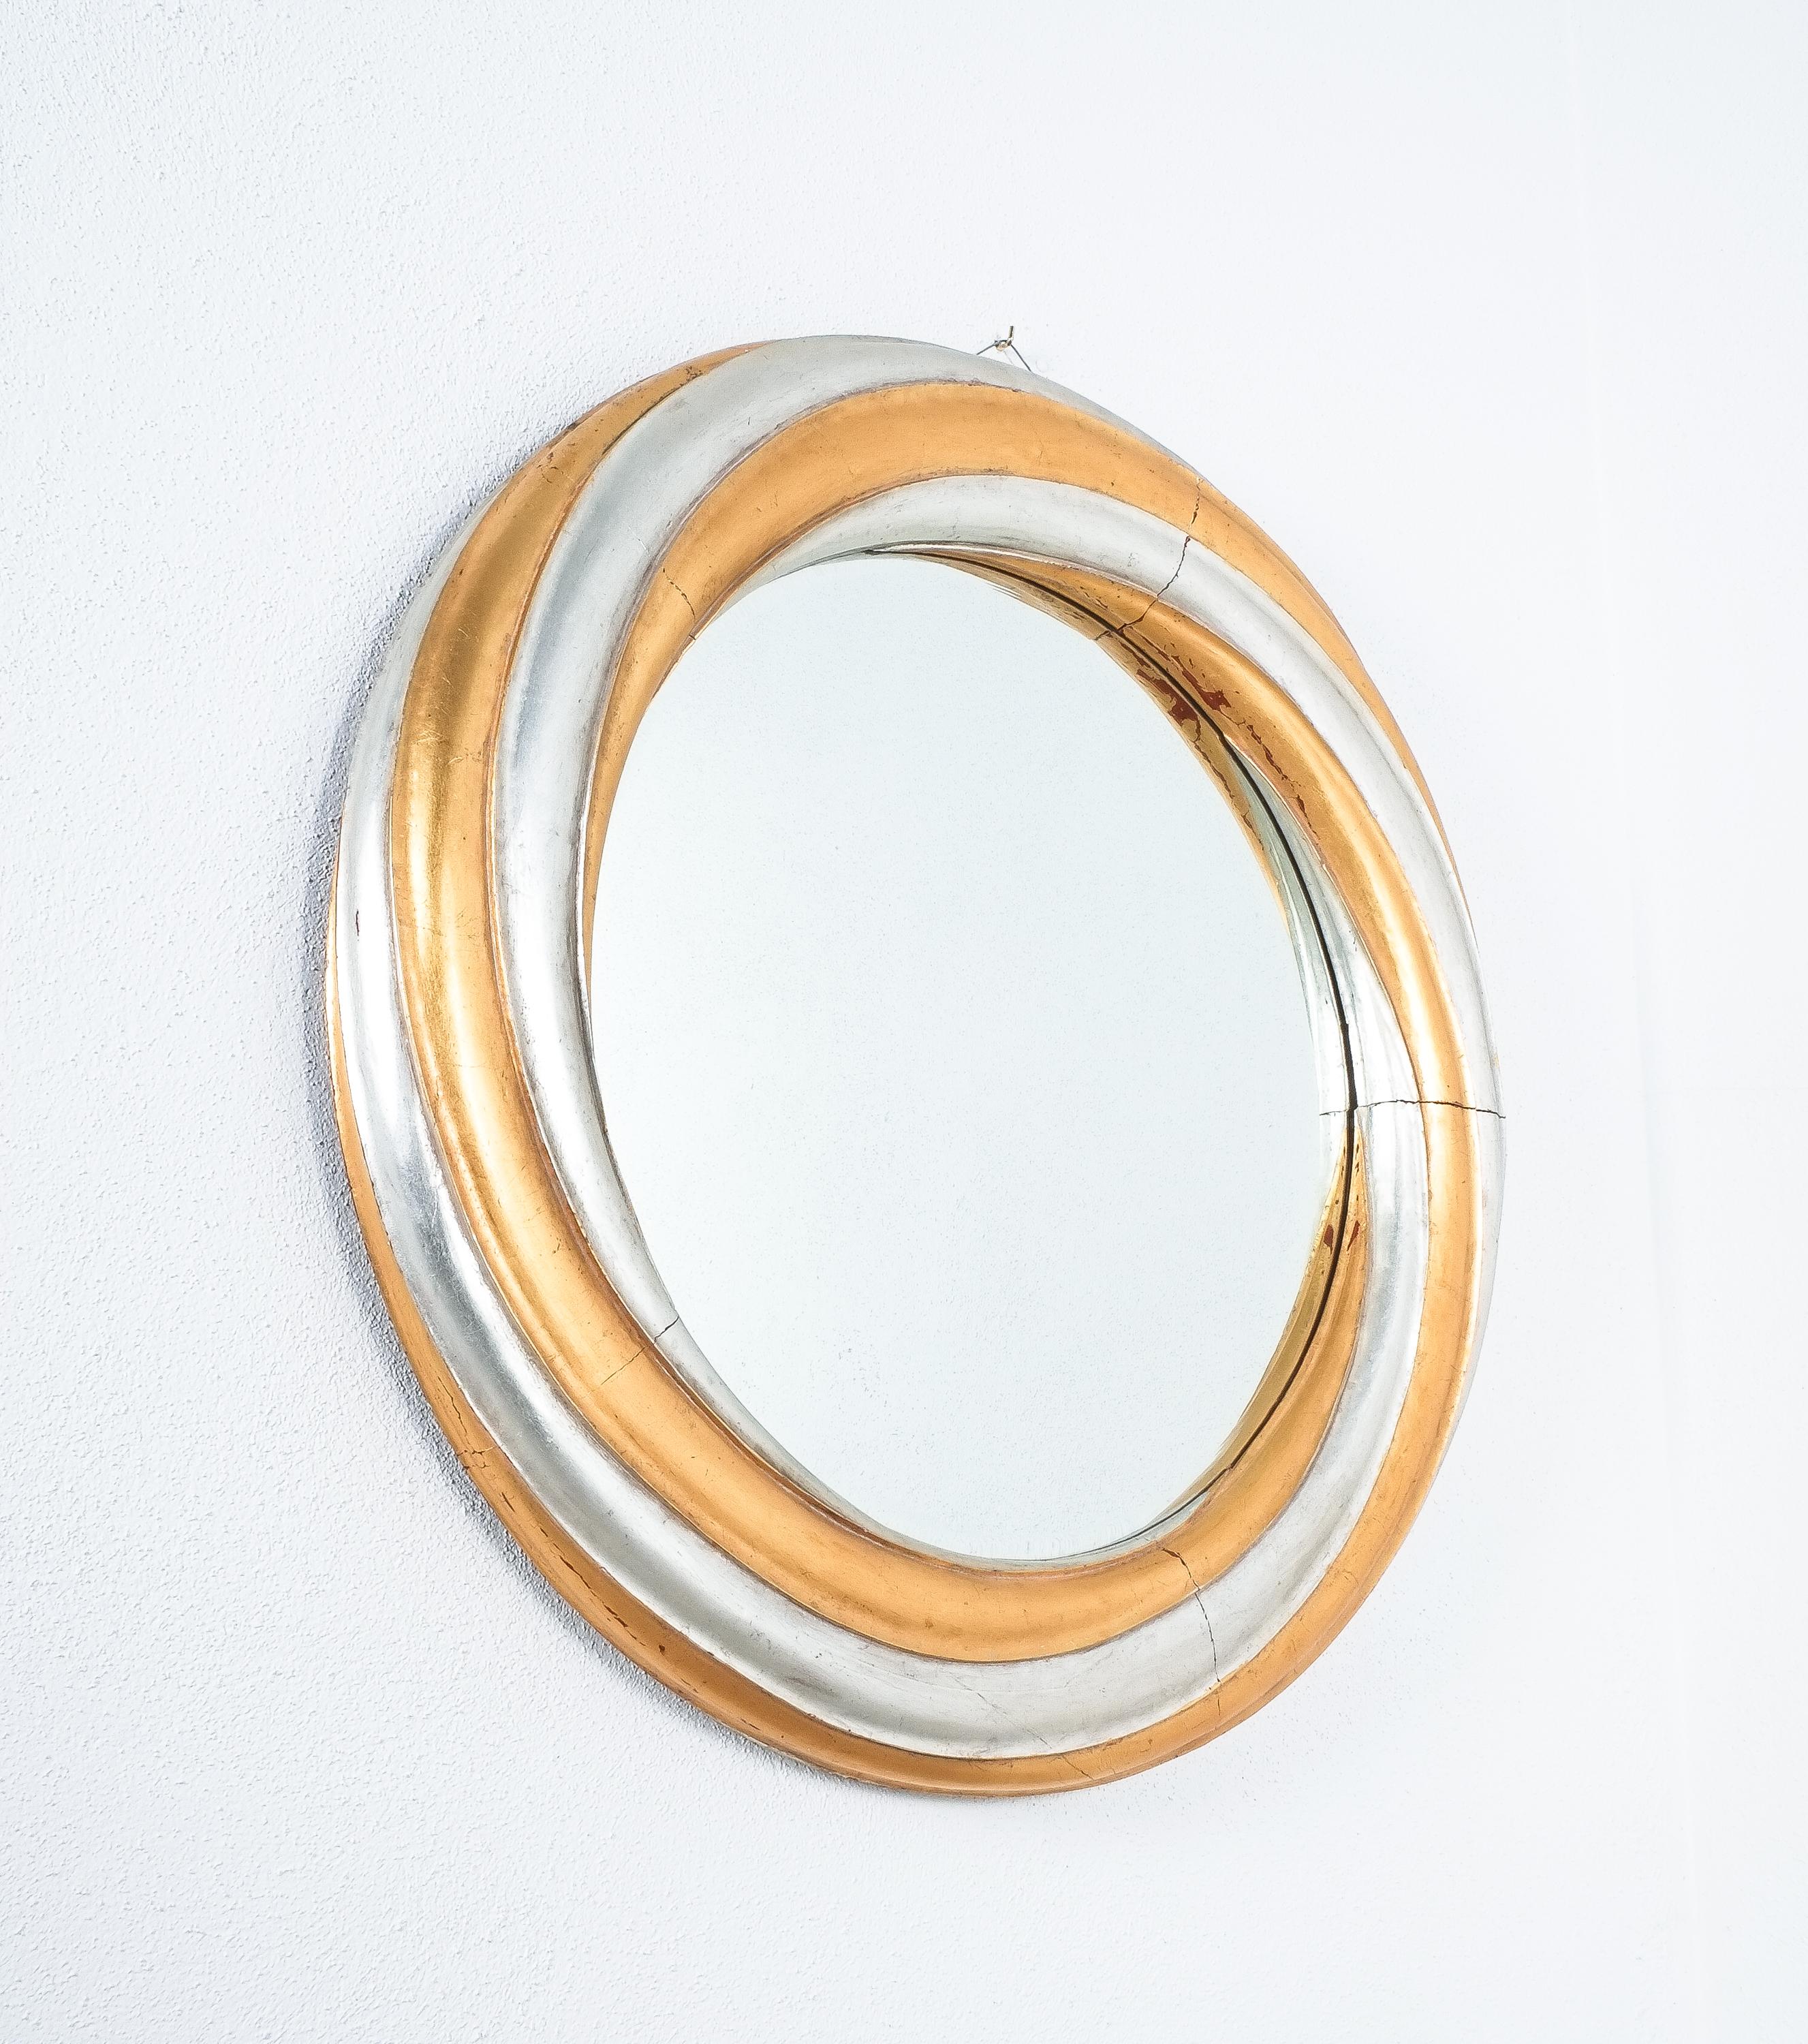 Neoclassical Large Wood Swirl Trompe l’oeil Wall Mirror, Italy For Sale